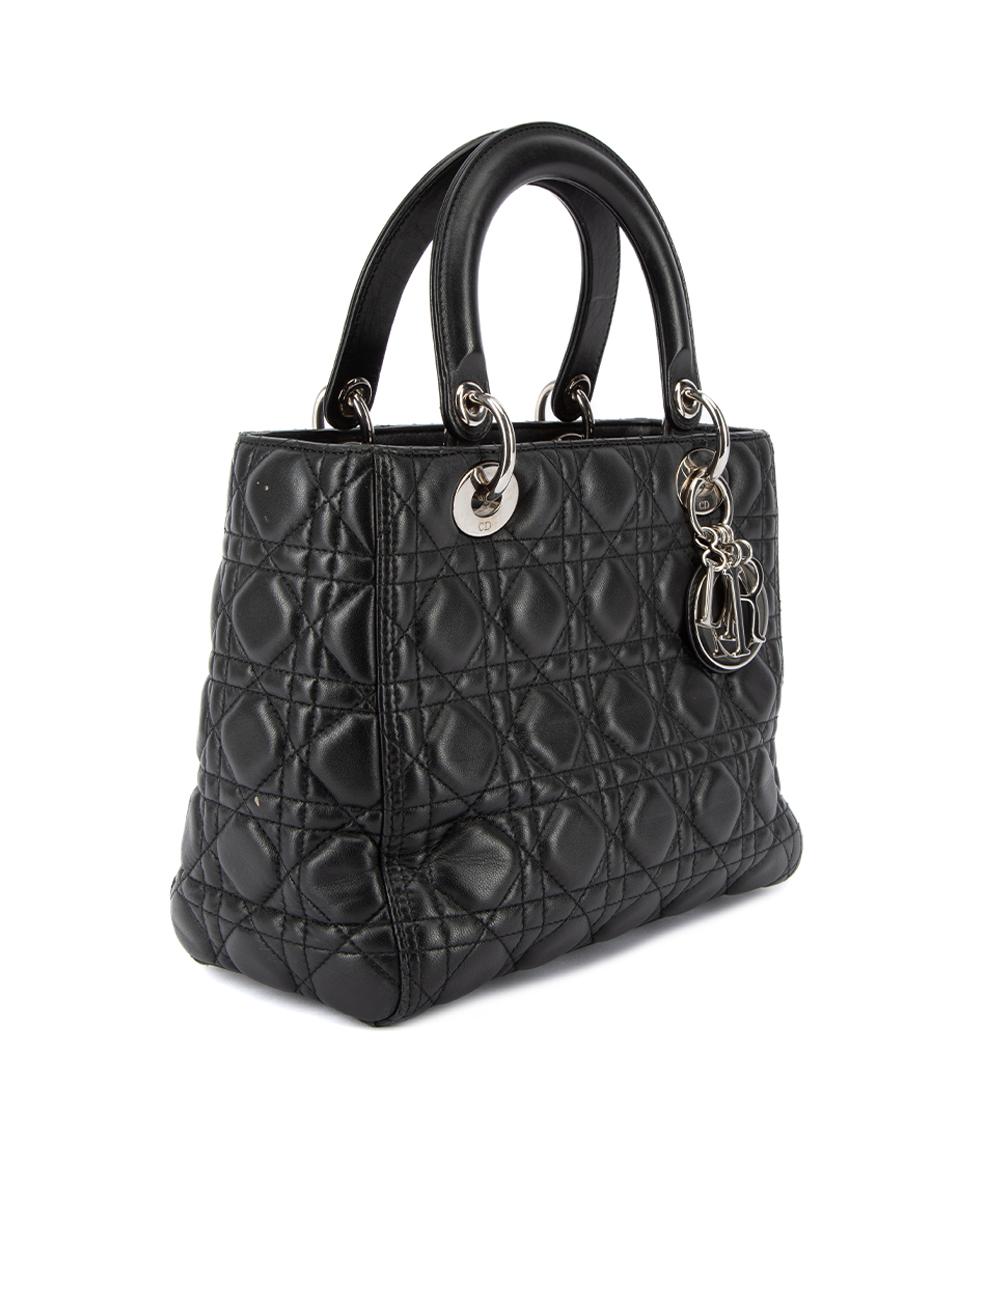 CONDITION is Very good. Minimal wear to bag is evident. Minimal wear the bag exterior leather where light marks and scuffs can be seen. There are some light scratches on the inner handle on this used Dior designer resale item.  Details  2016 Black